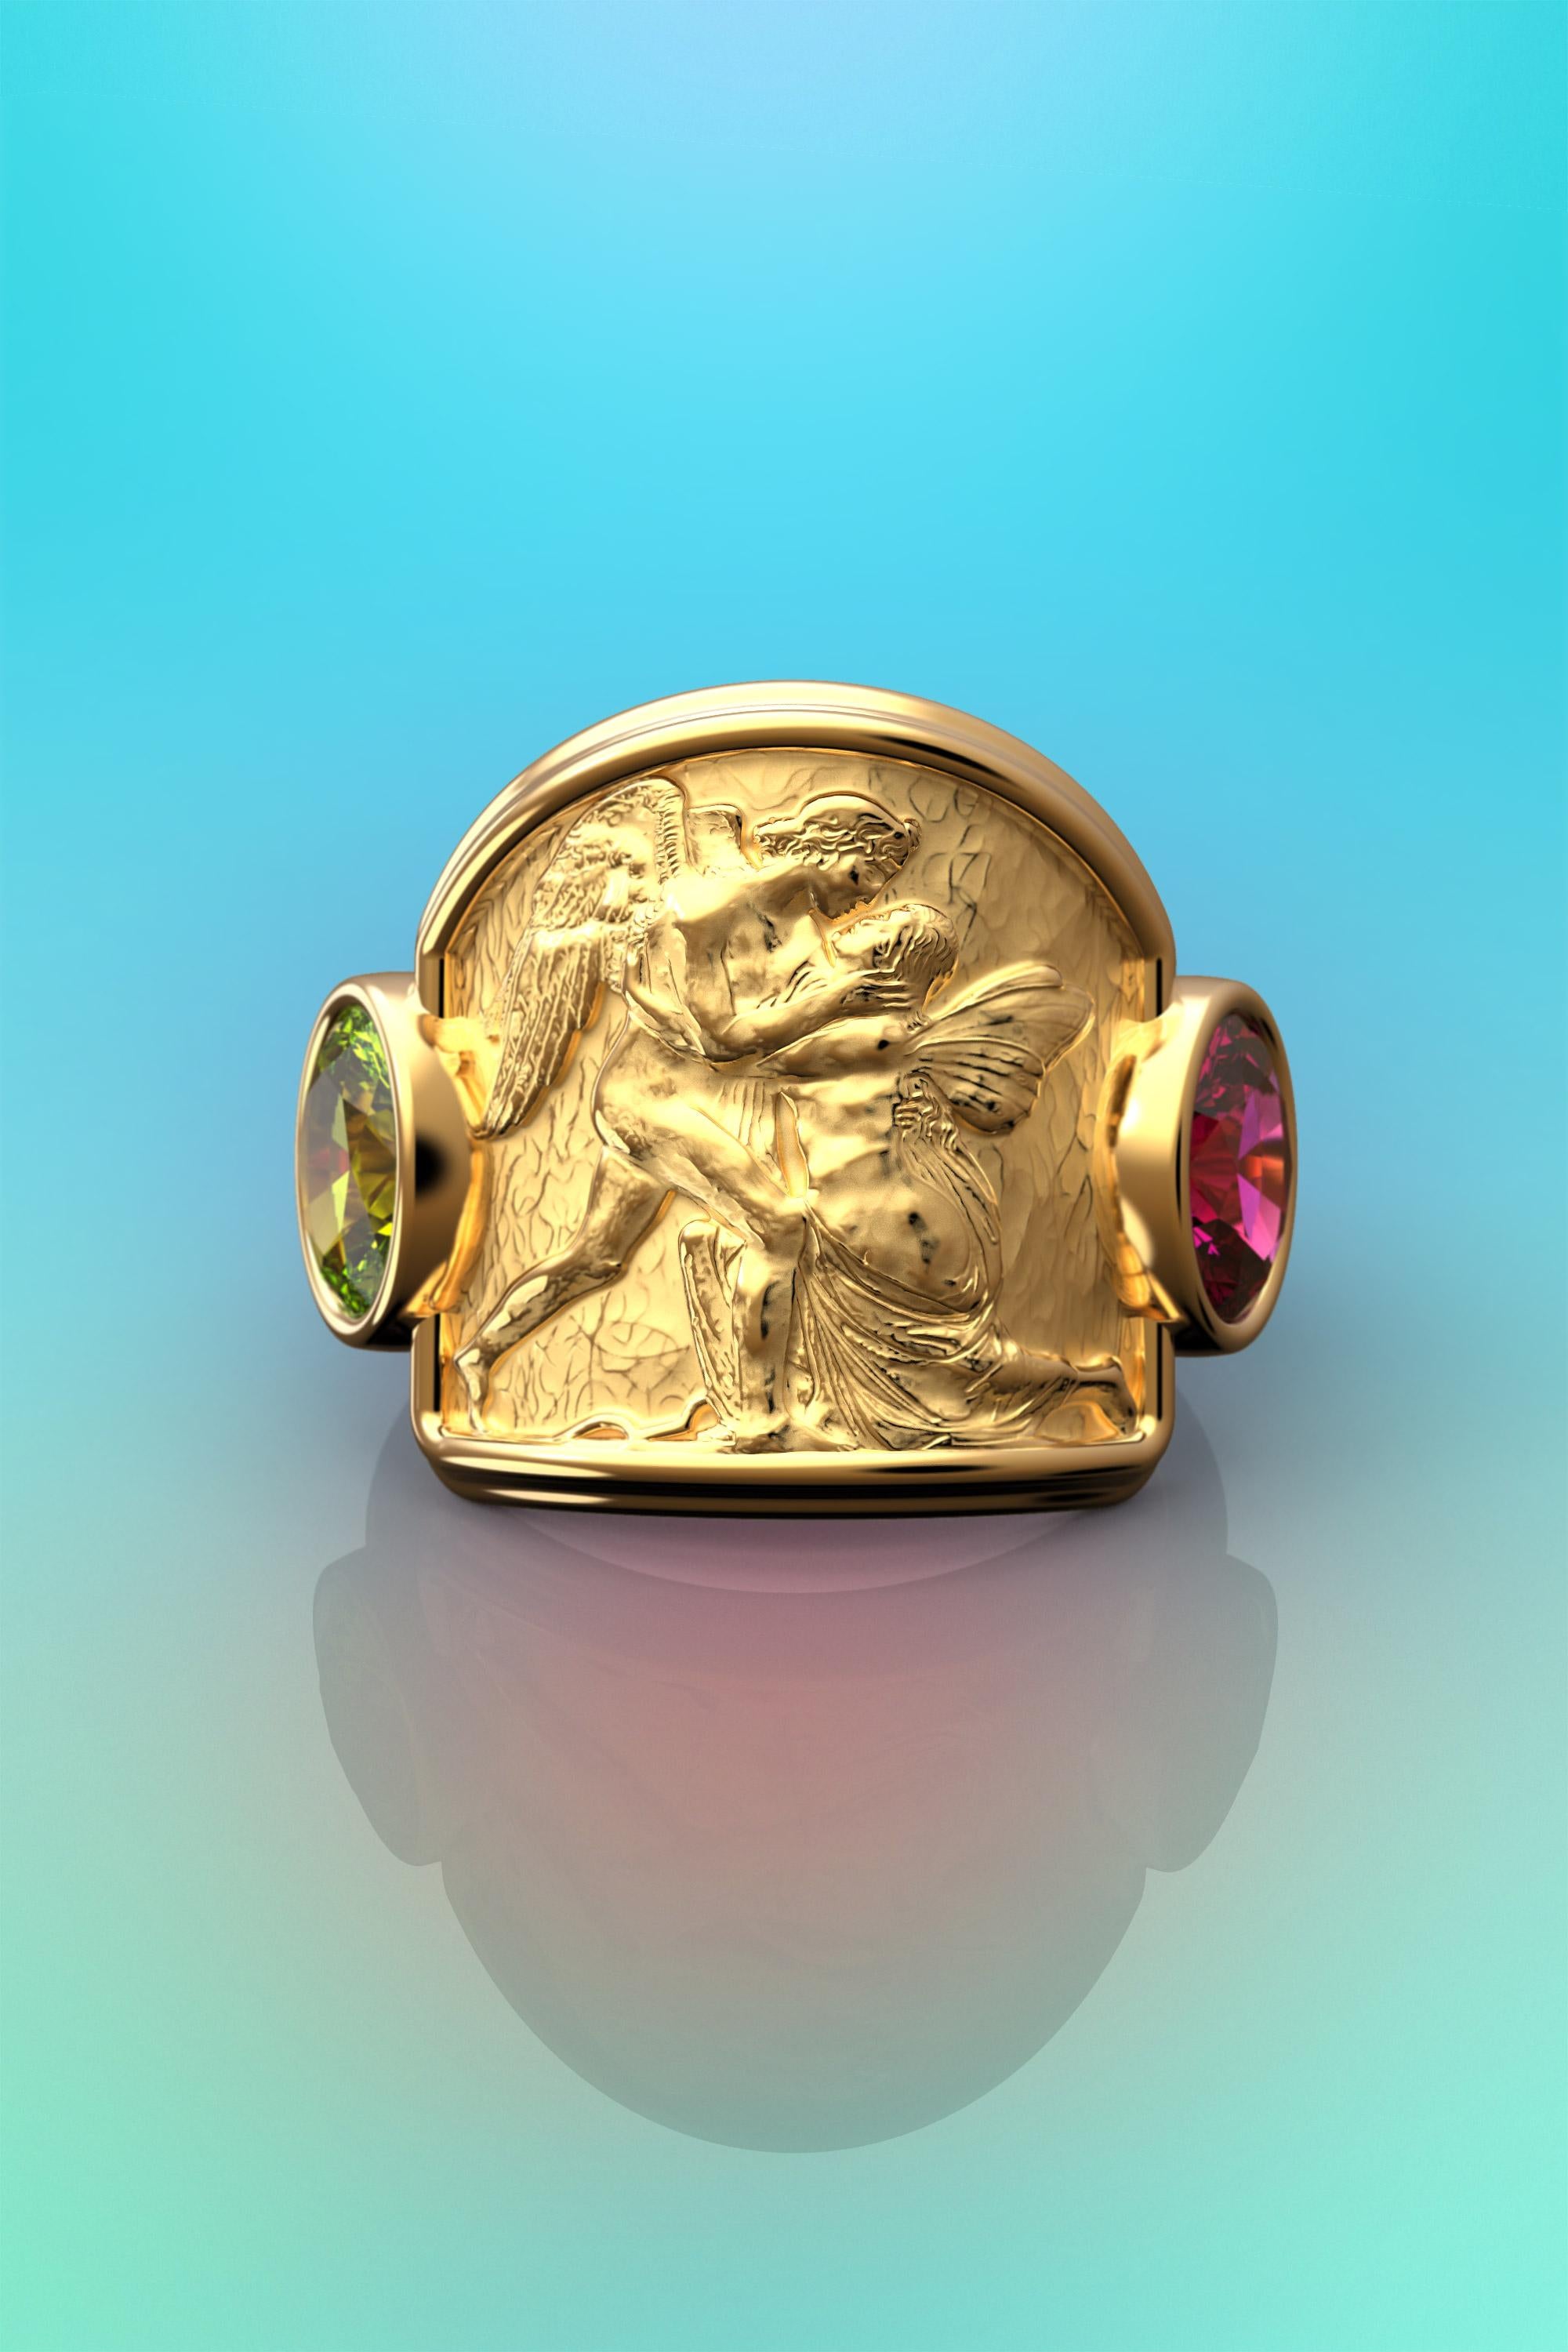 For Sale:  Oltremare Gioielli Sculptural Ring, Love and Psyche 18k Gold Ring, Italian Gold 11